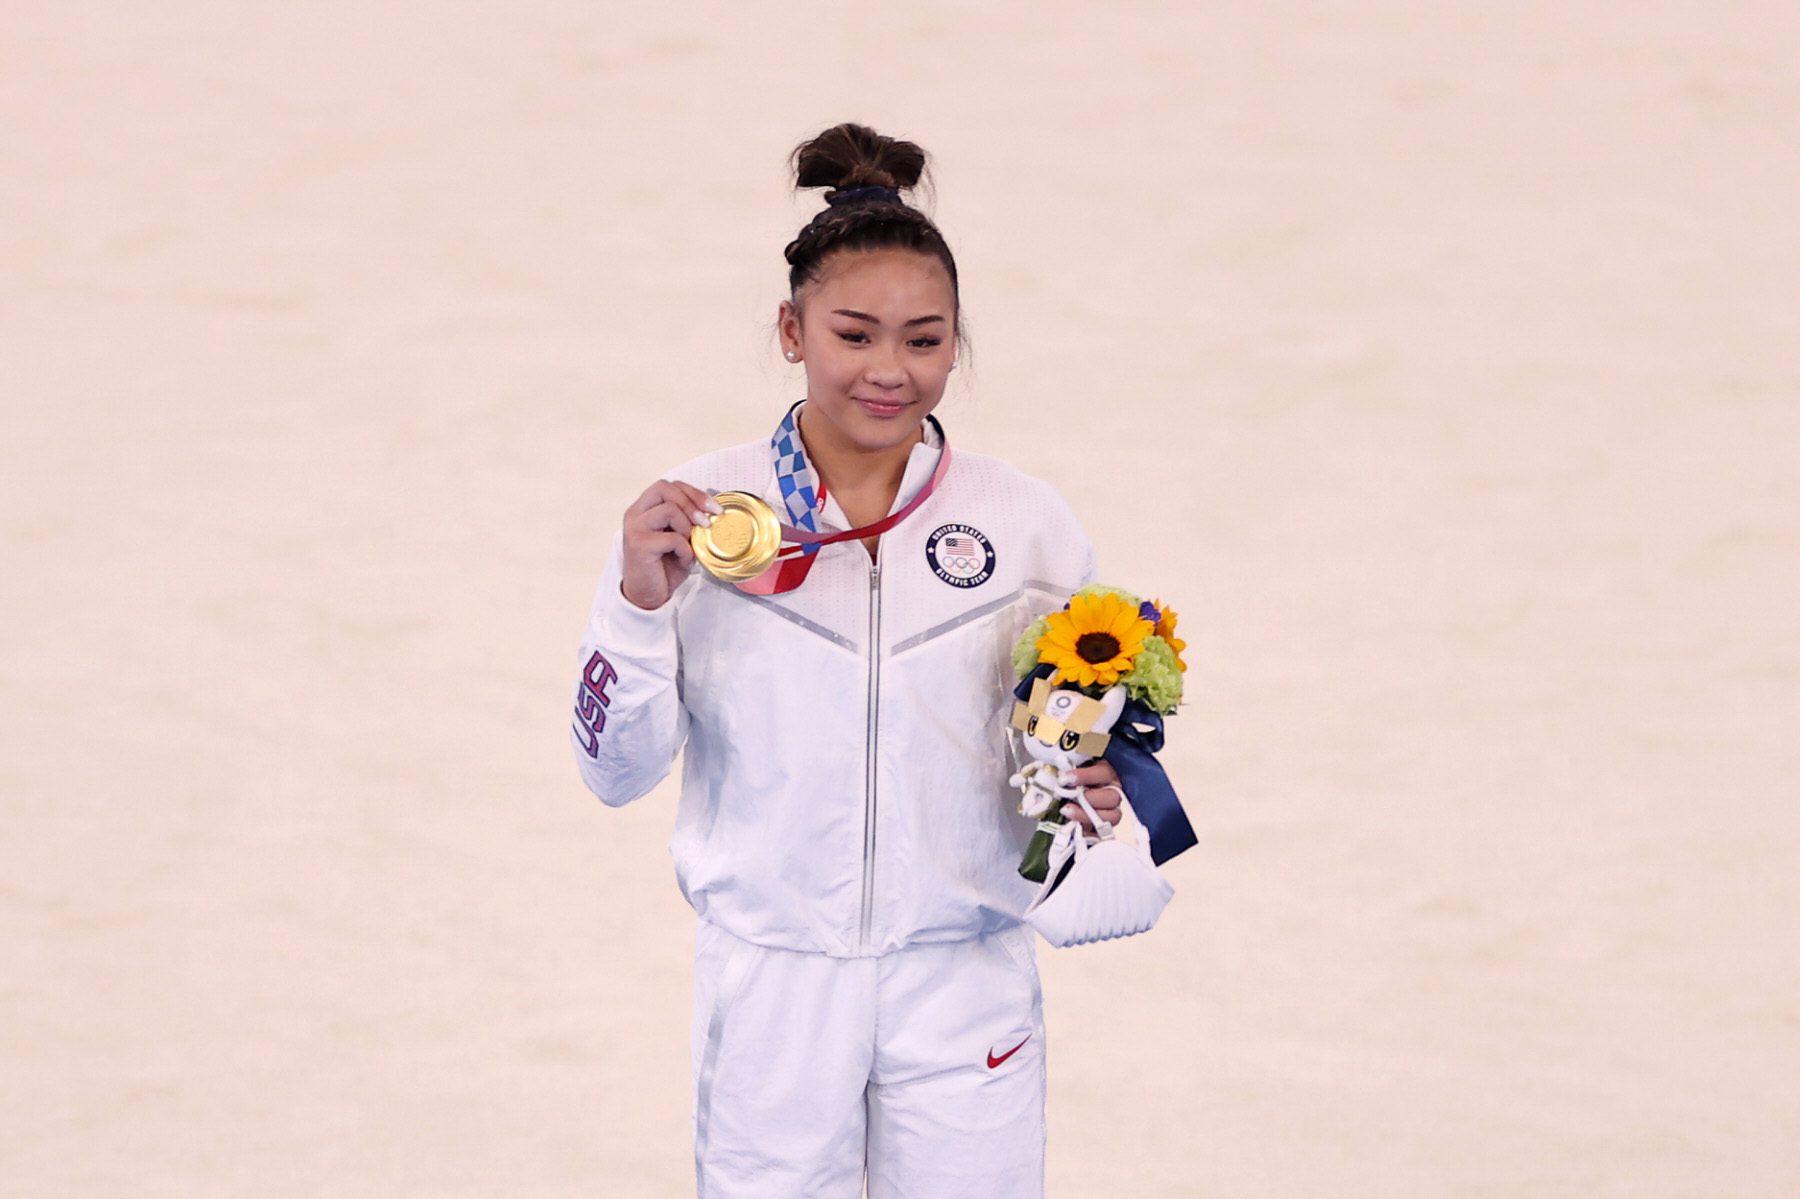 Sunisa Lee wins Olympic gold, a first for Hmong Americans